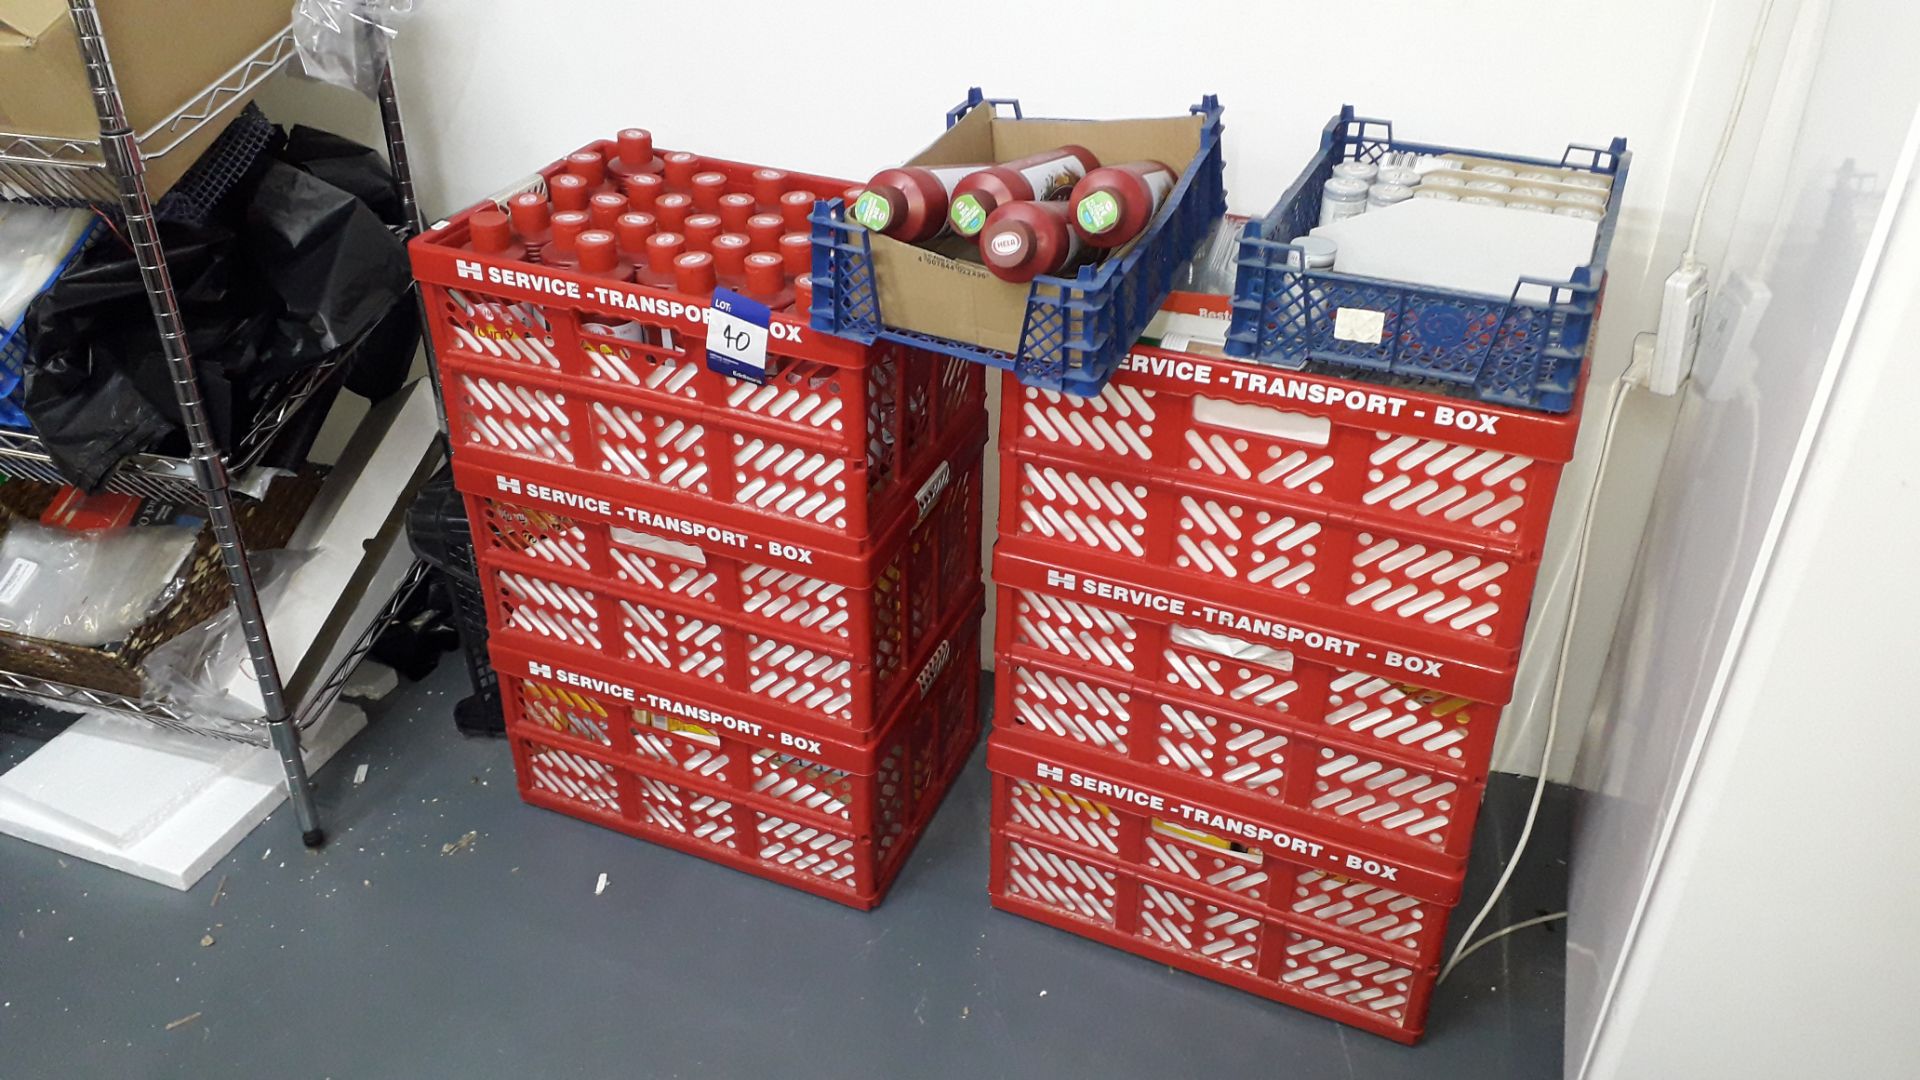 Quantity of Food Stock and racking to Room to include Haribo Sweets, Cakes, Biscuits, Crisps, - Image 3 of 8